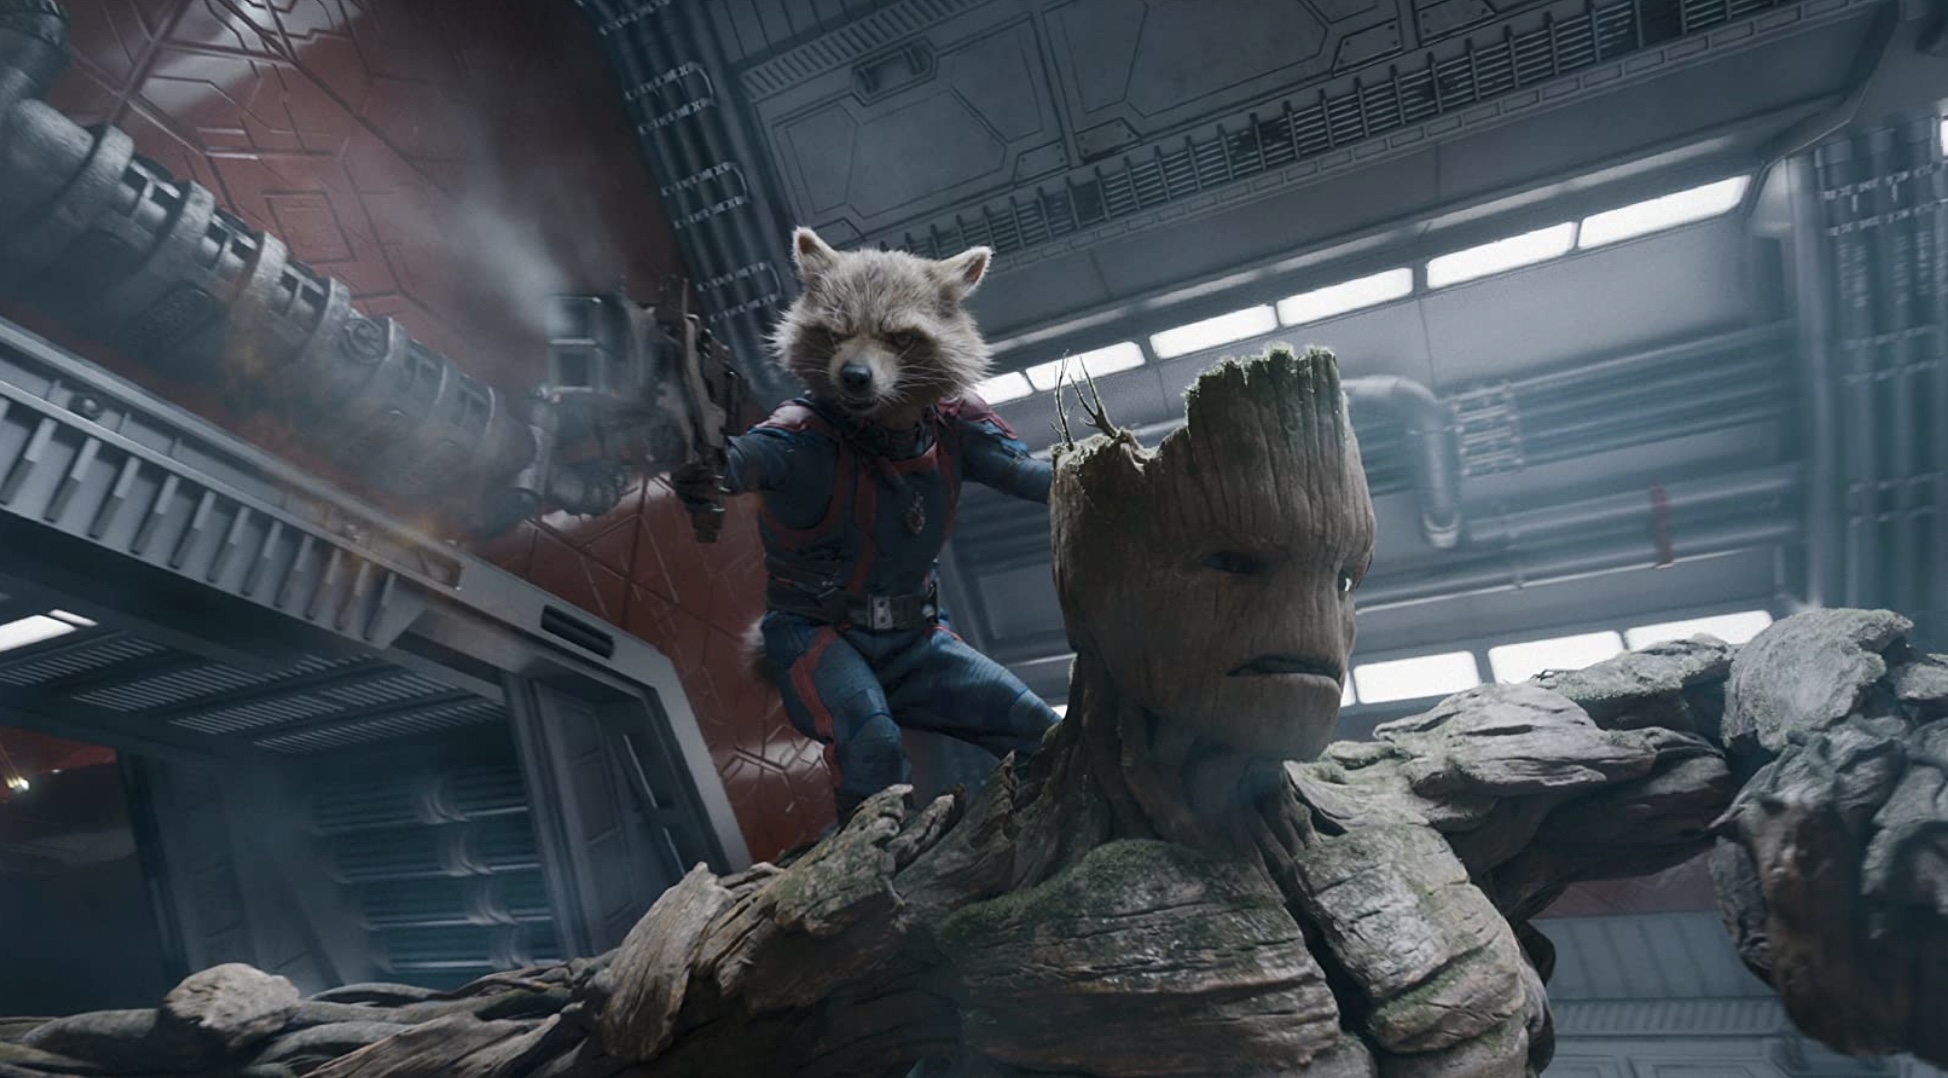 Rocket Raccoon and Groot fight side by side in Marvels Guardians of the Galaxy Vol. 3